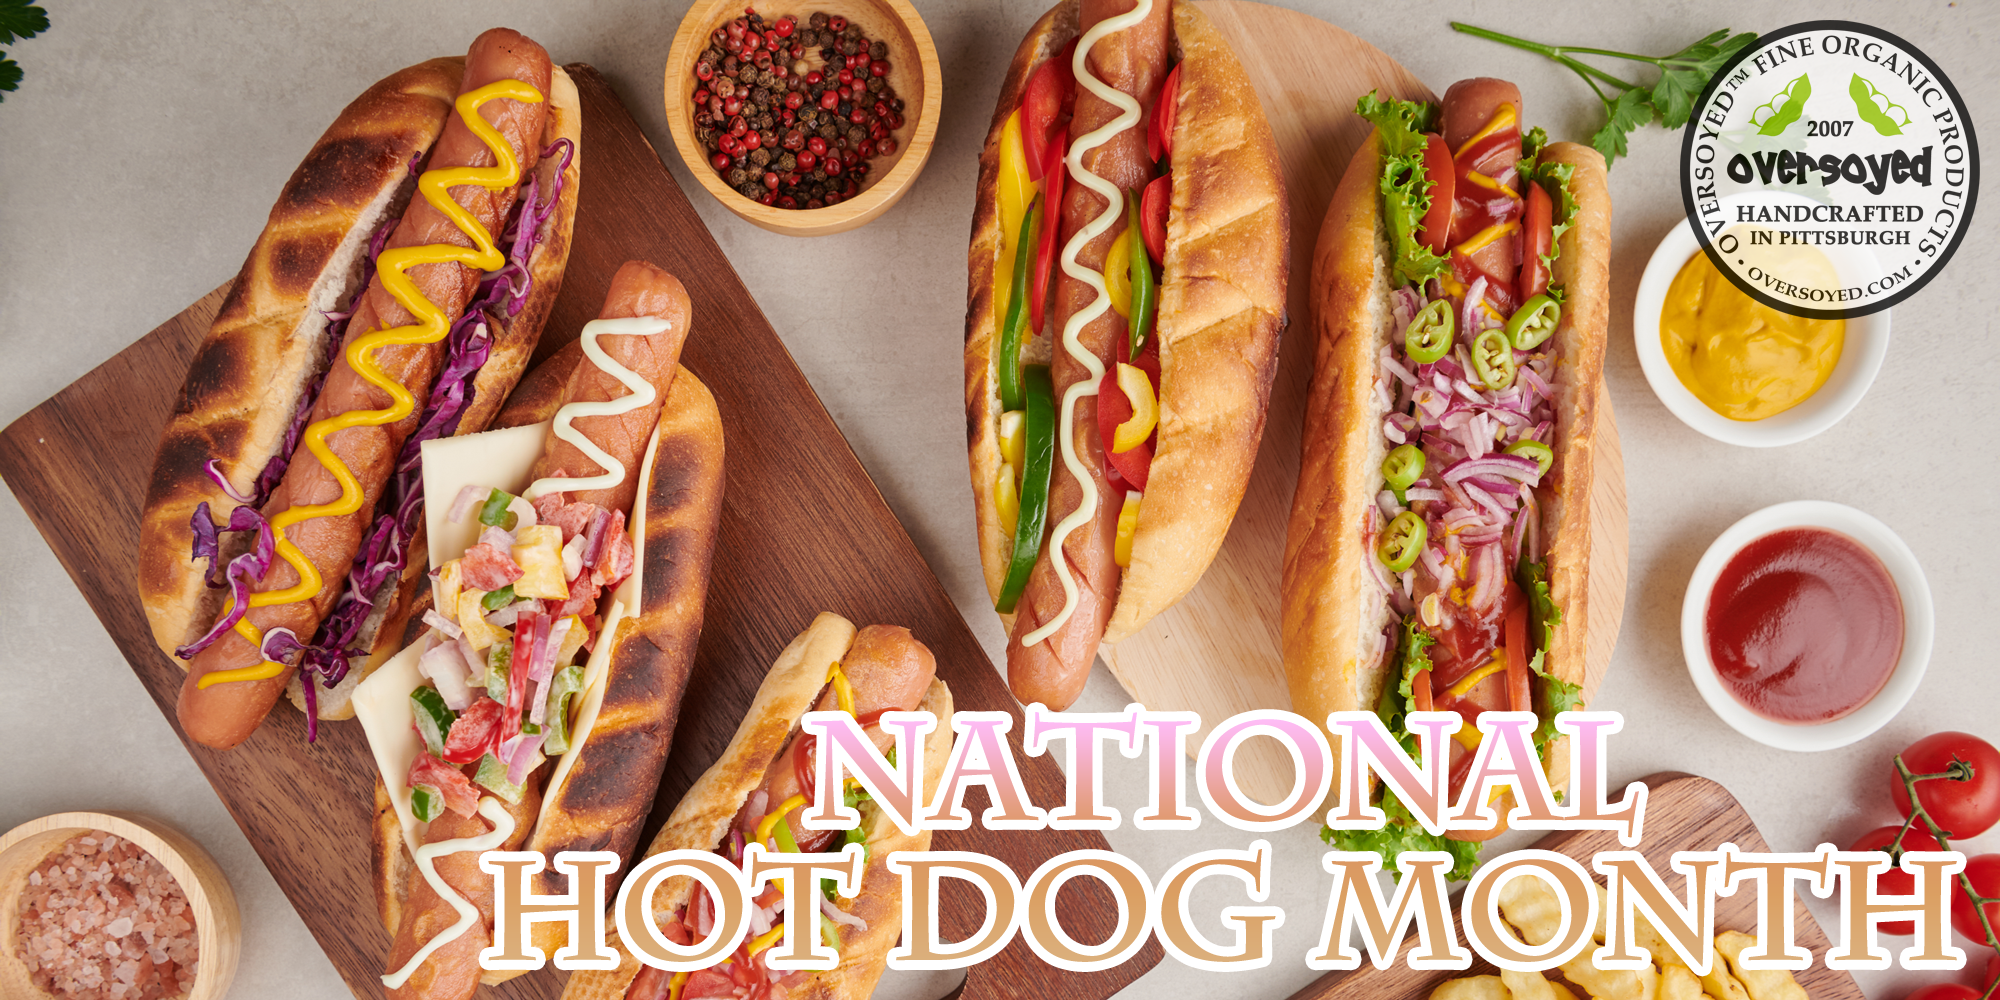 OverSoyed Fine Organic Products - National Hot Dog Month